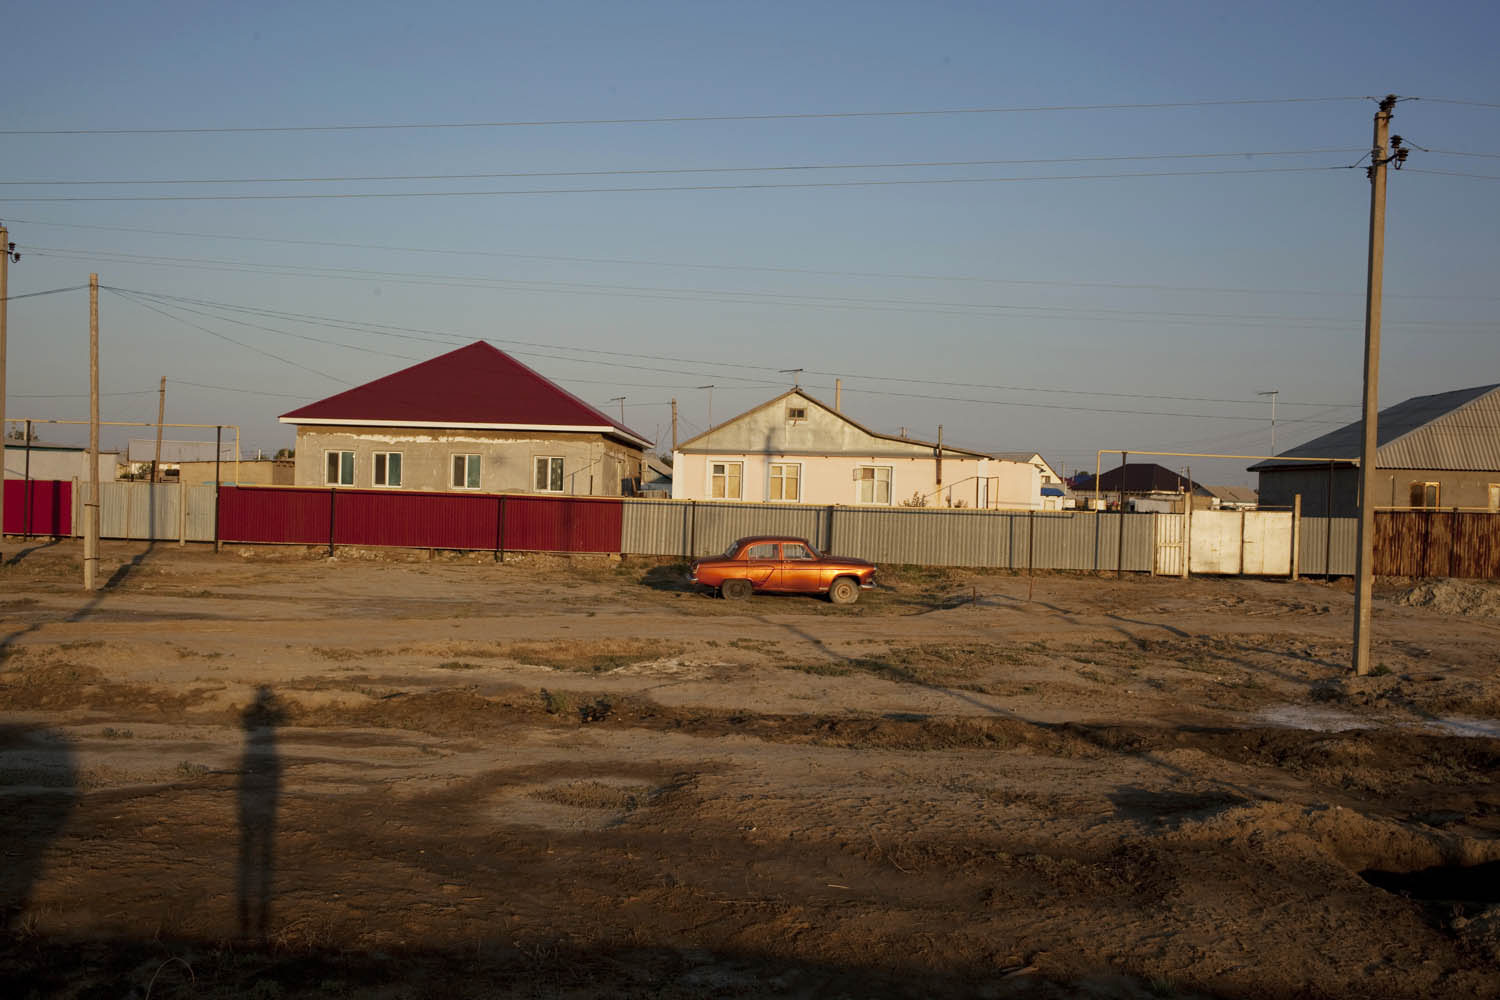 A street scene in Atyrau, an oil city in western Kazakhstan that is 50km from the medieval trading city of Saraychik that Ibn Battuta visited in the 14th century.